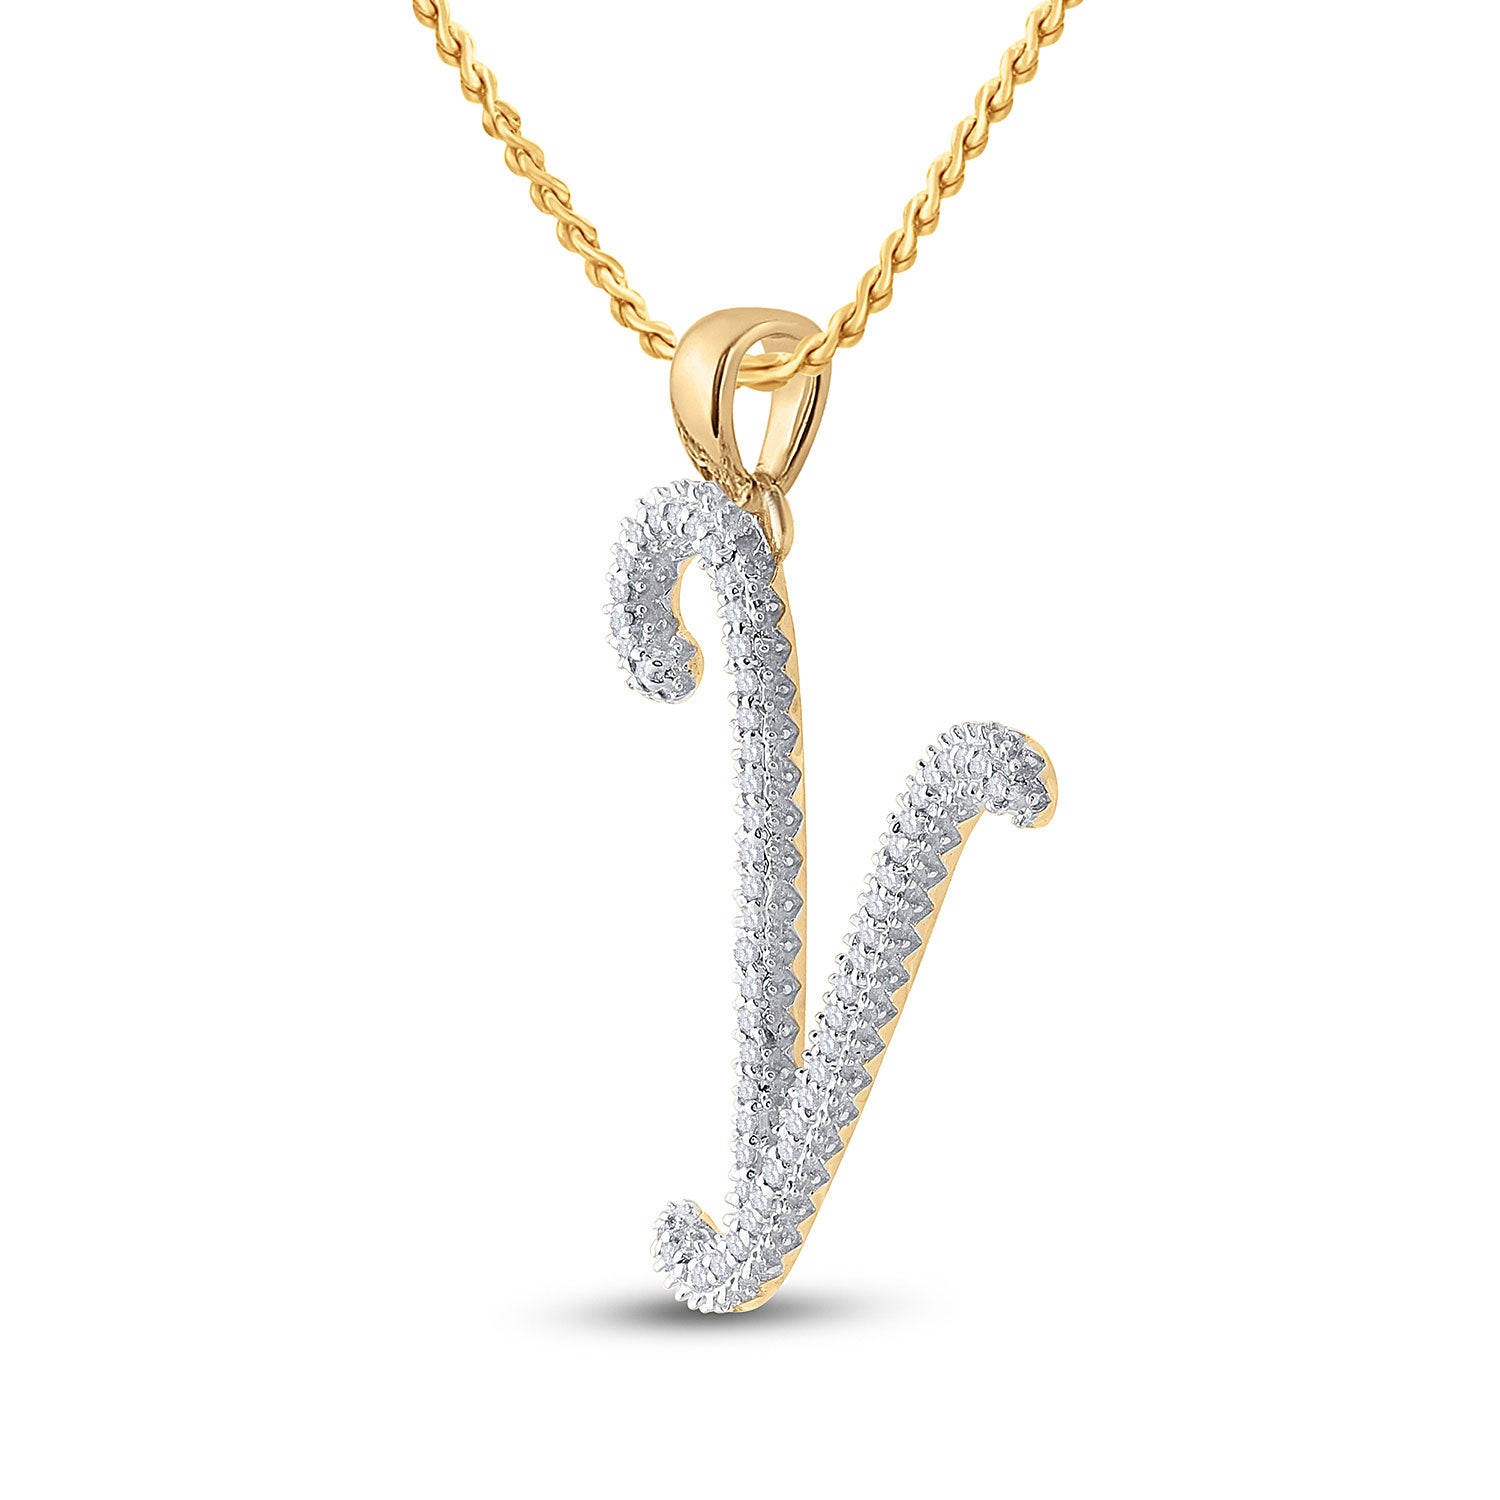 10kt Yellow Gold Womens Round Diamond Initial Y Letter Pendant 1/6 Cttw